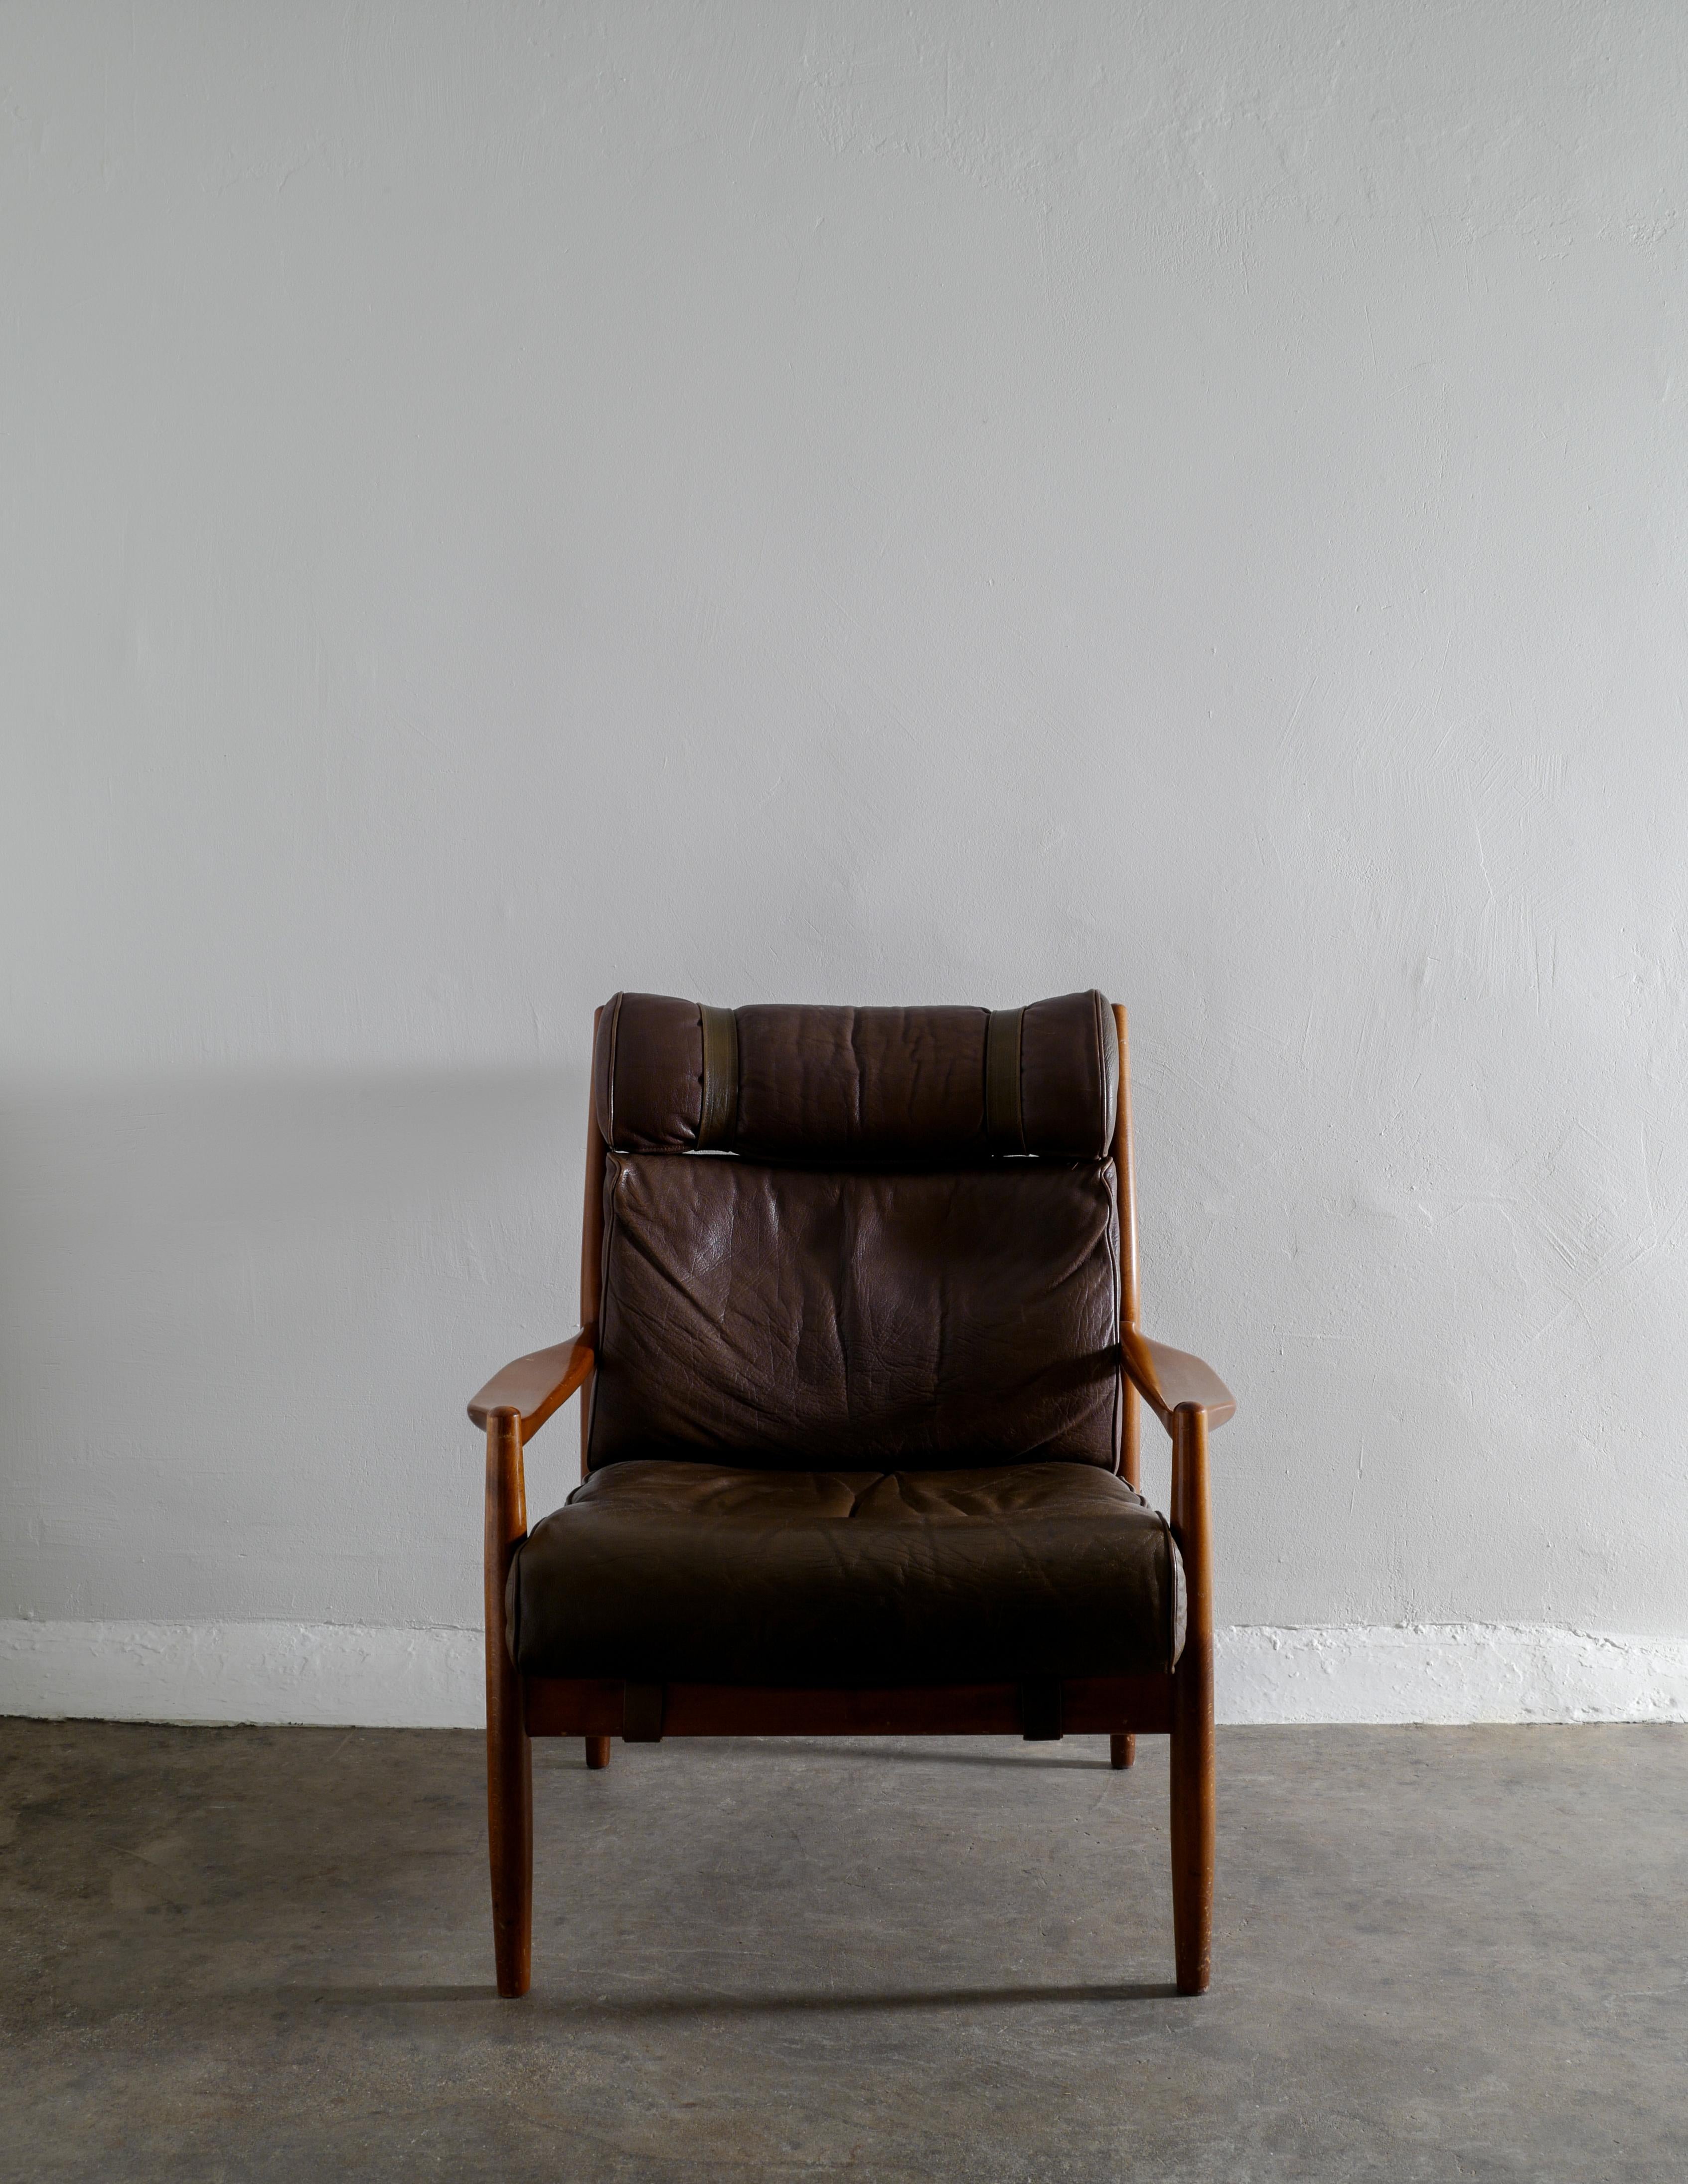 Scandinavian Modern Leather Arm Easychair by Ingemar Thillmark Produced by OPE Möbler, Sweden, 1960s For Sale